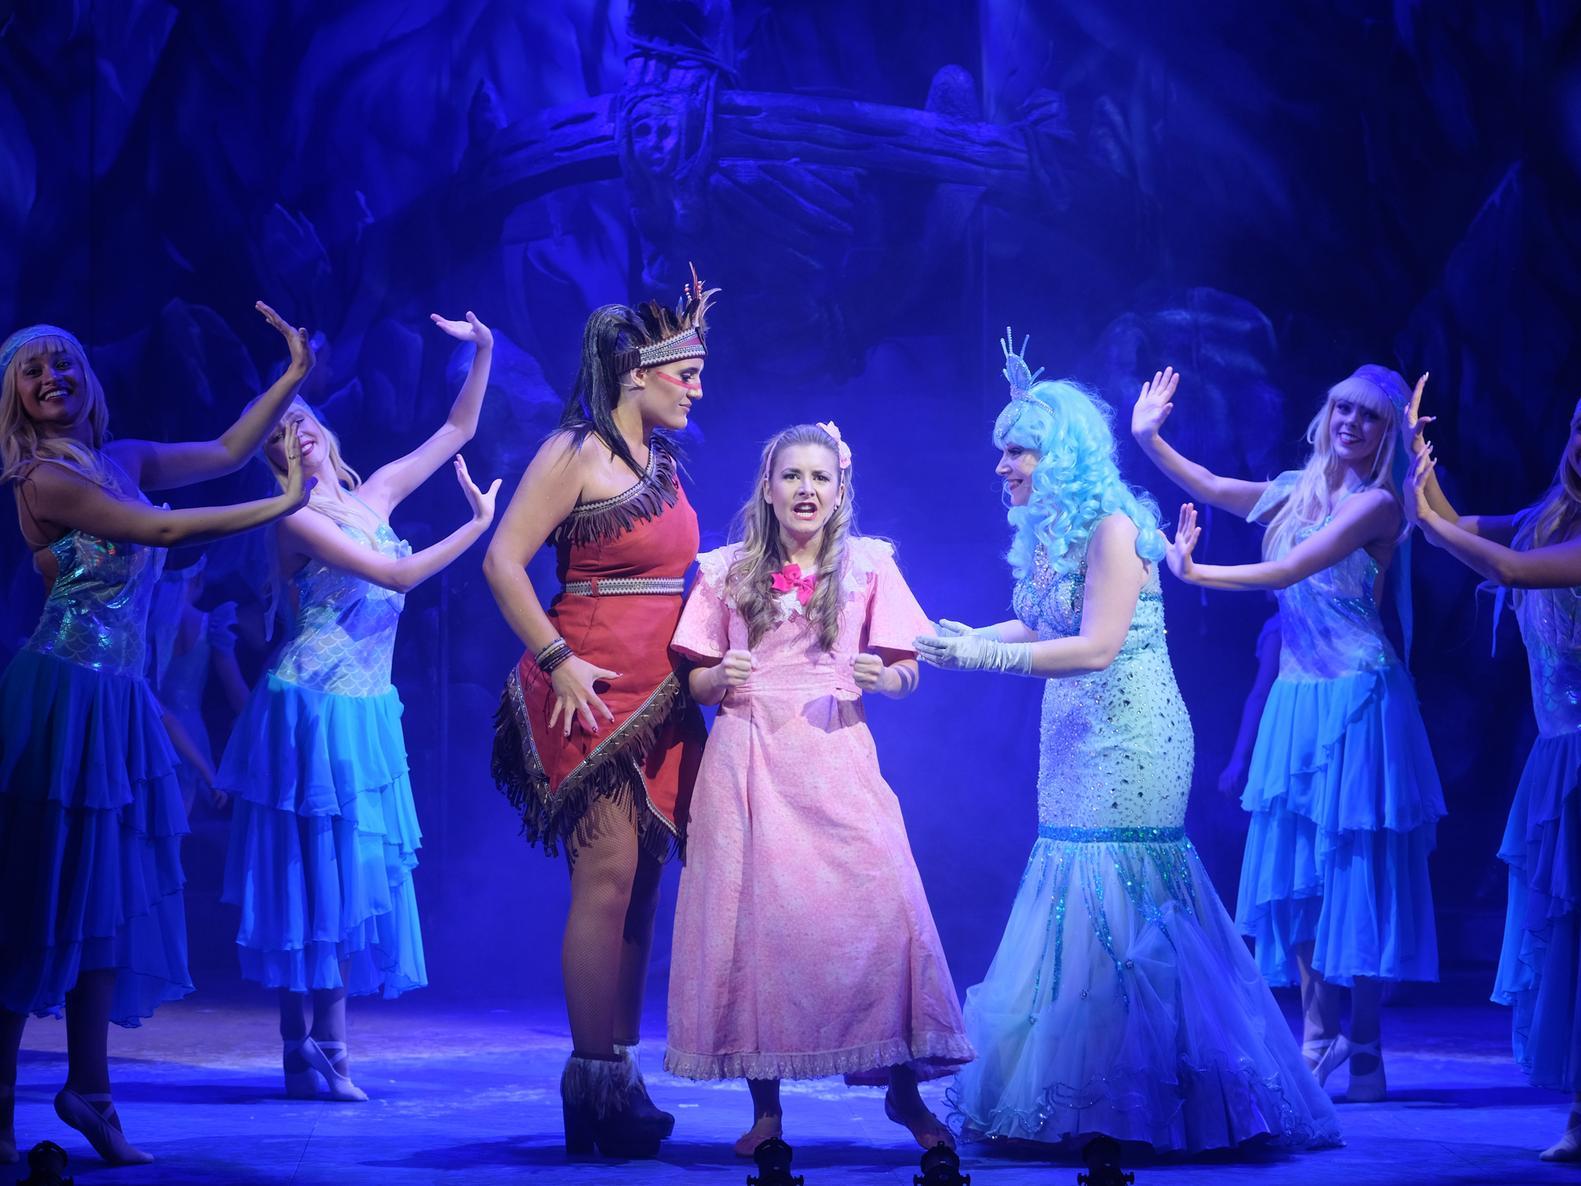 Blackpool actress Christina Meehan returns to the Grand as Mrs Darling and Mermaid, with  Natalie Hollingsworth as Tiger Lilly and Ruth Betteridge as Wendy. Pictures: Martin Bostock